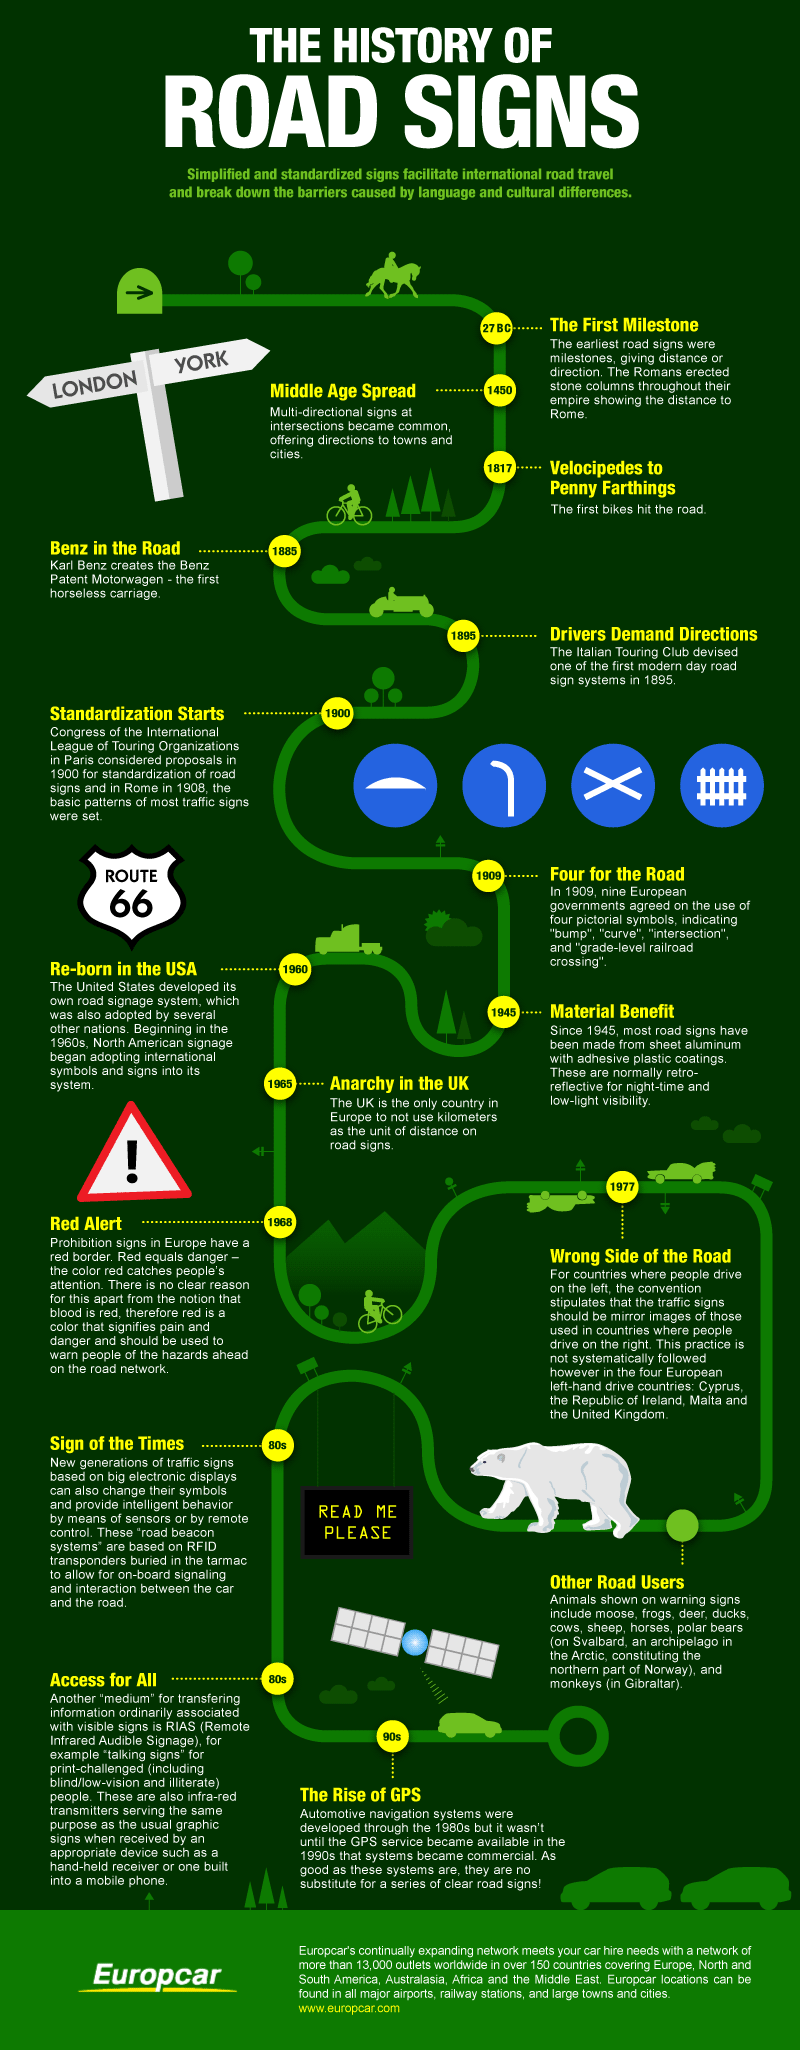 The History of Road Signs by Europcar 